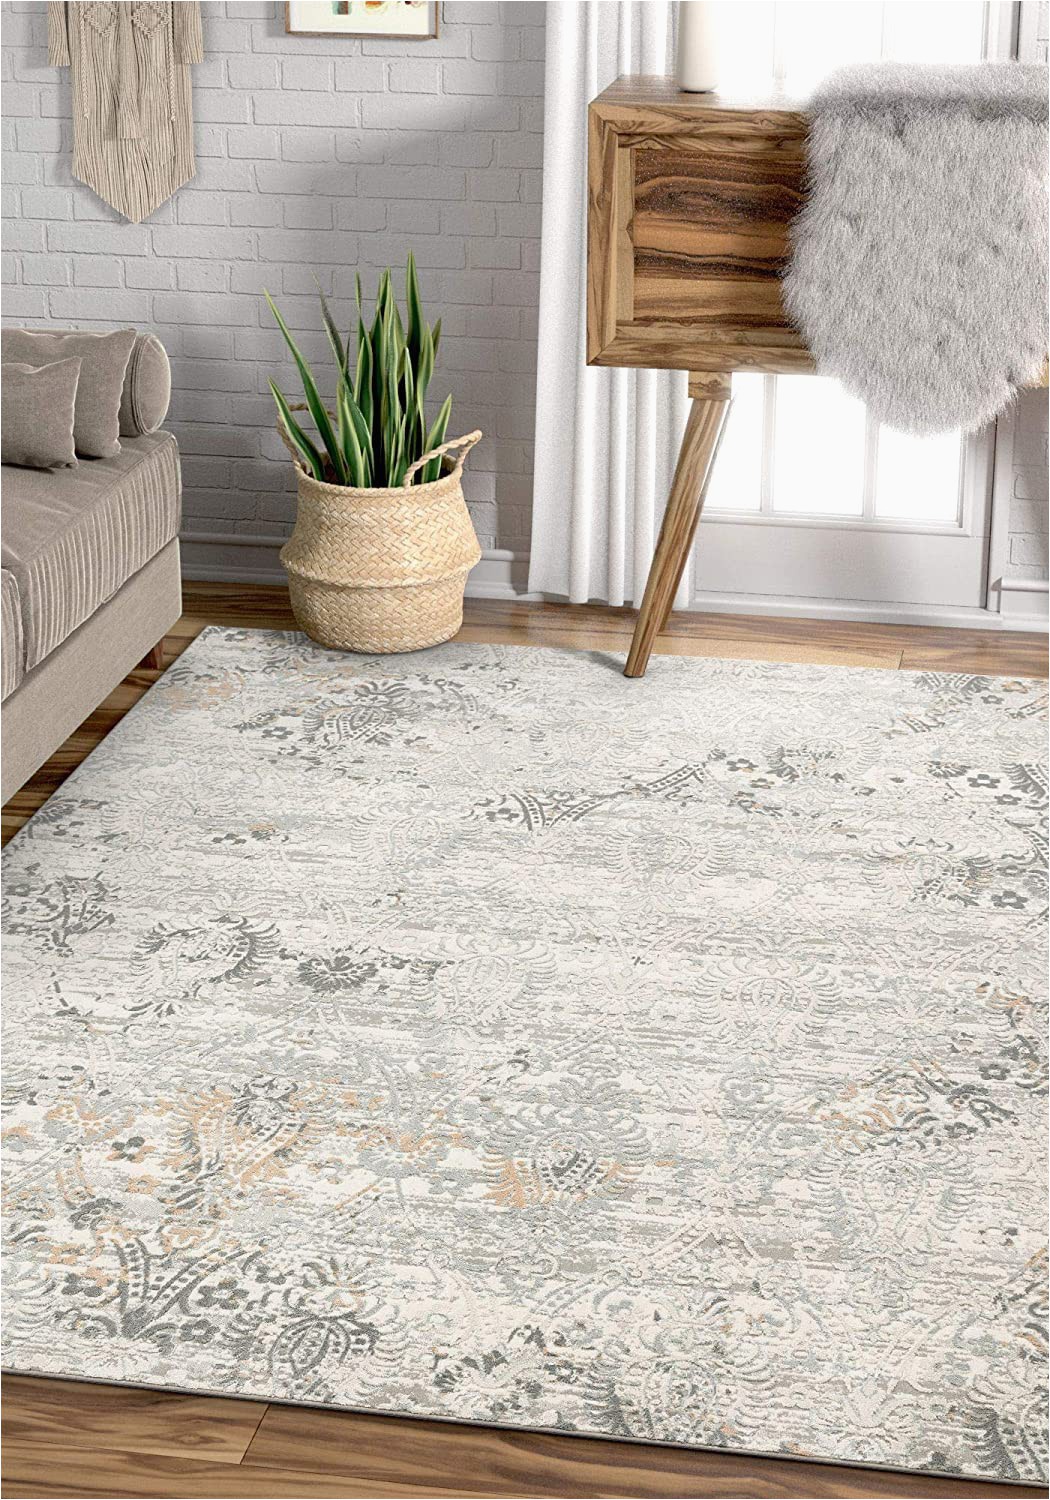 5 7 area Rugs Under 50 Well Woven Alma Grey Abstract Vintage Floral Panel Design area Rug 5×7 5 3" X 7 3"